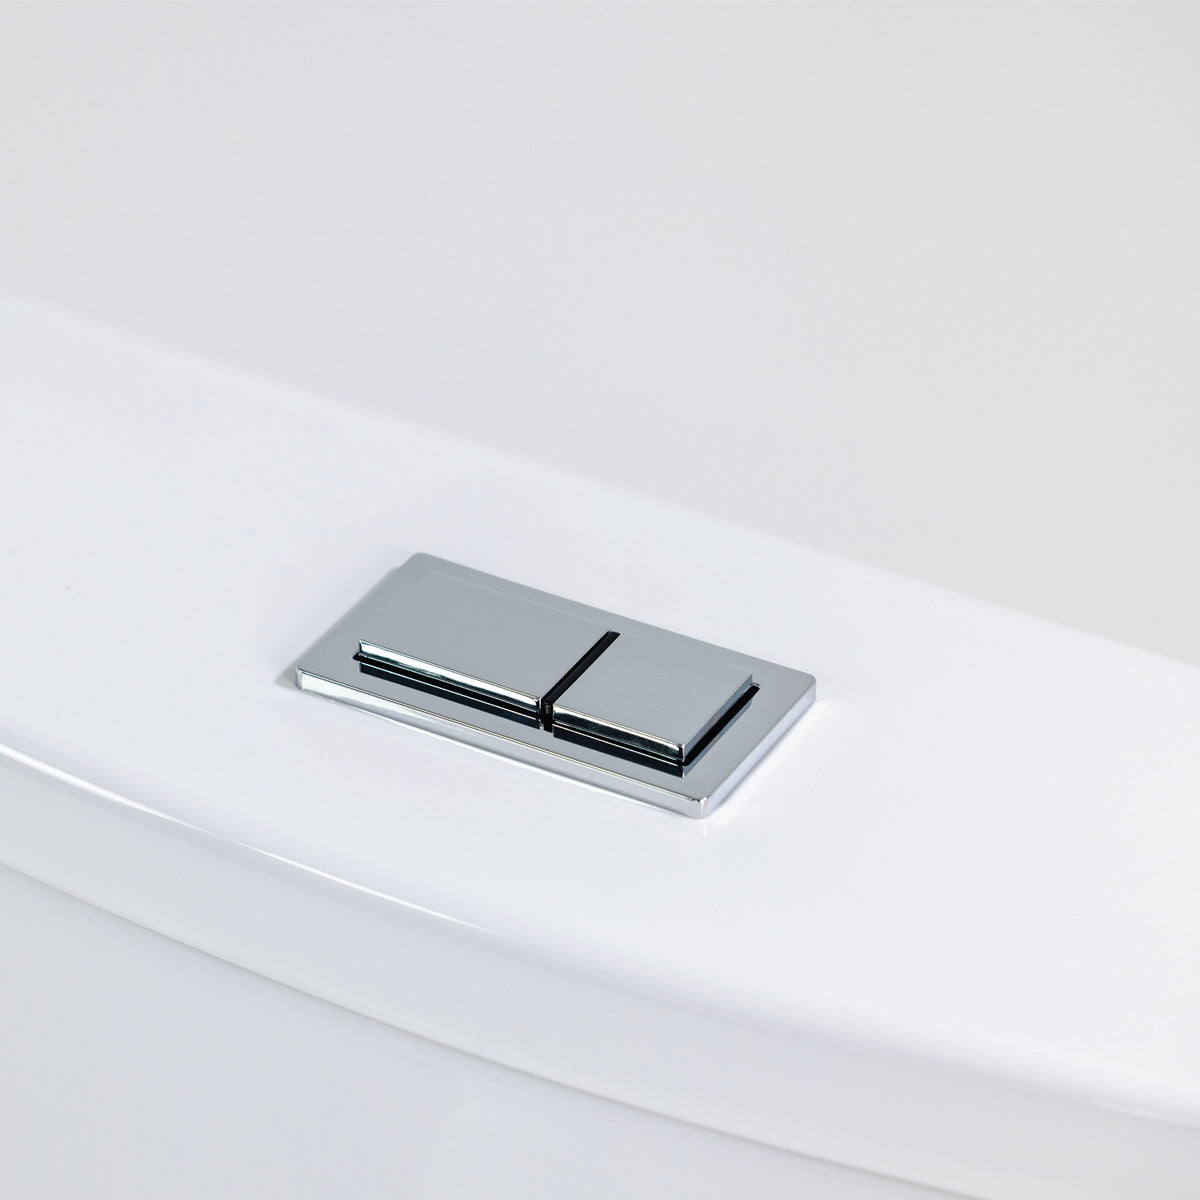 Tornado V3: The toilet of choice – silent, powerful flush, 4-star water efficiency, comfort height pan, non-marking design, and sleek aesthetics.